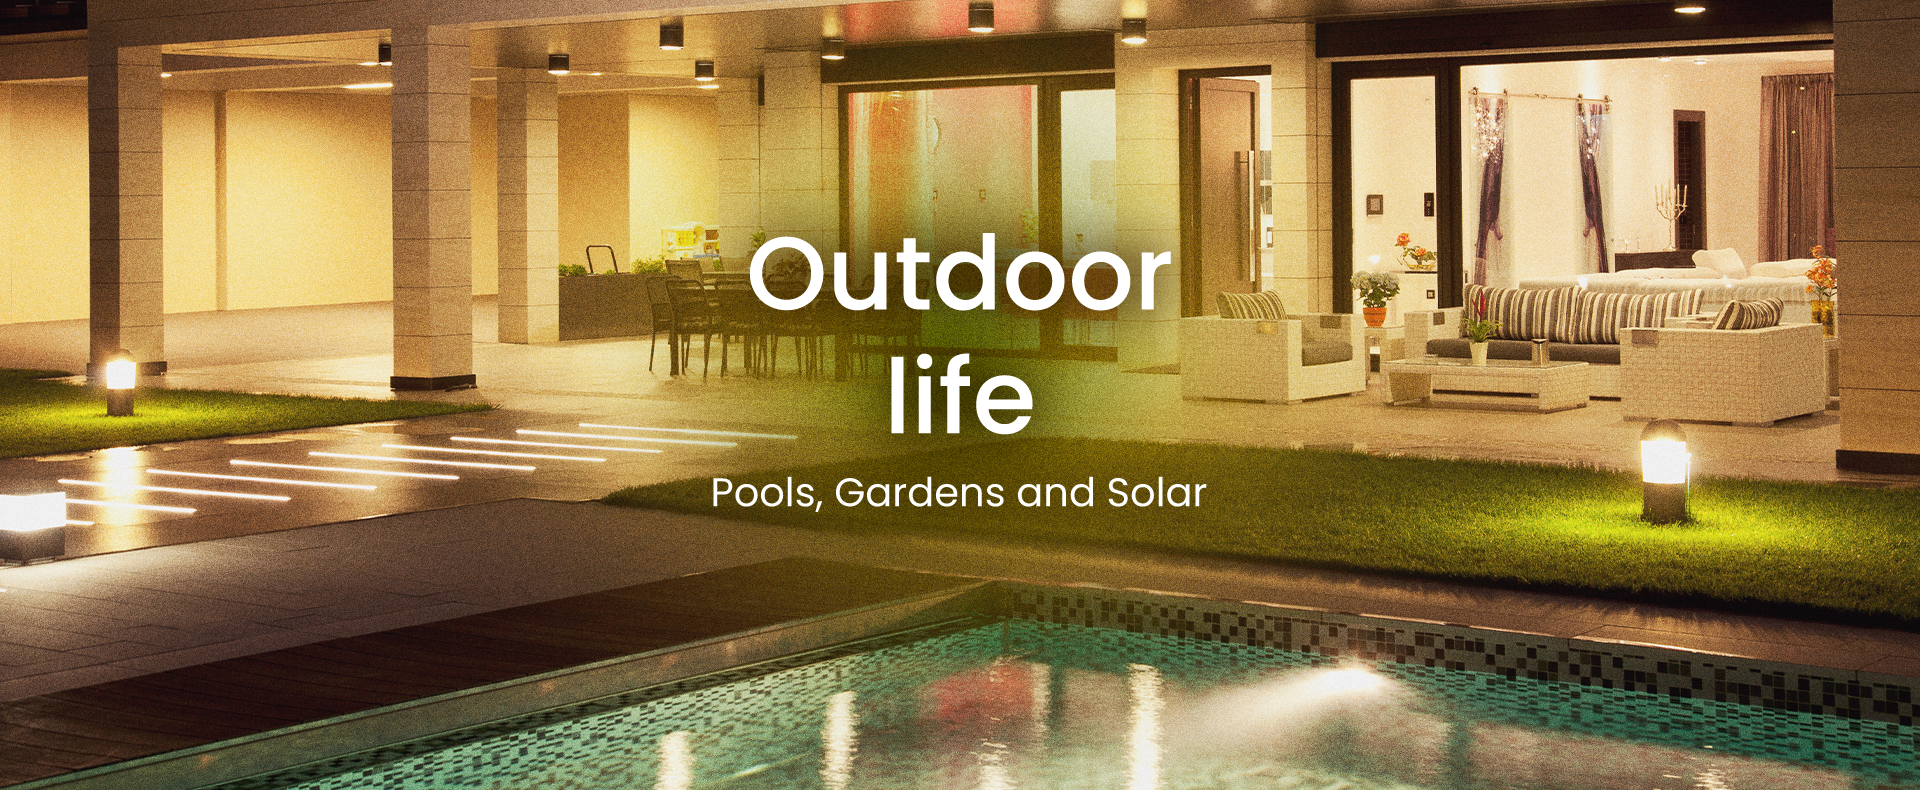 Pools, Gardens and Solar LED